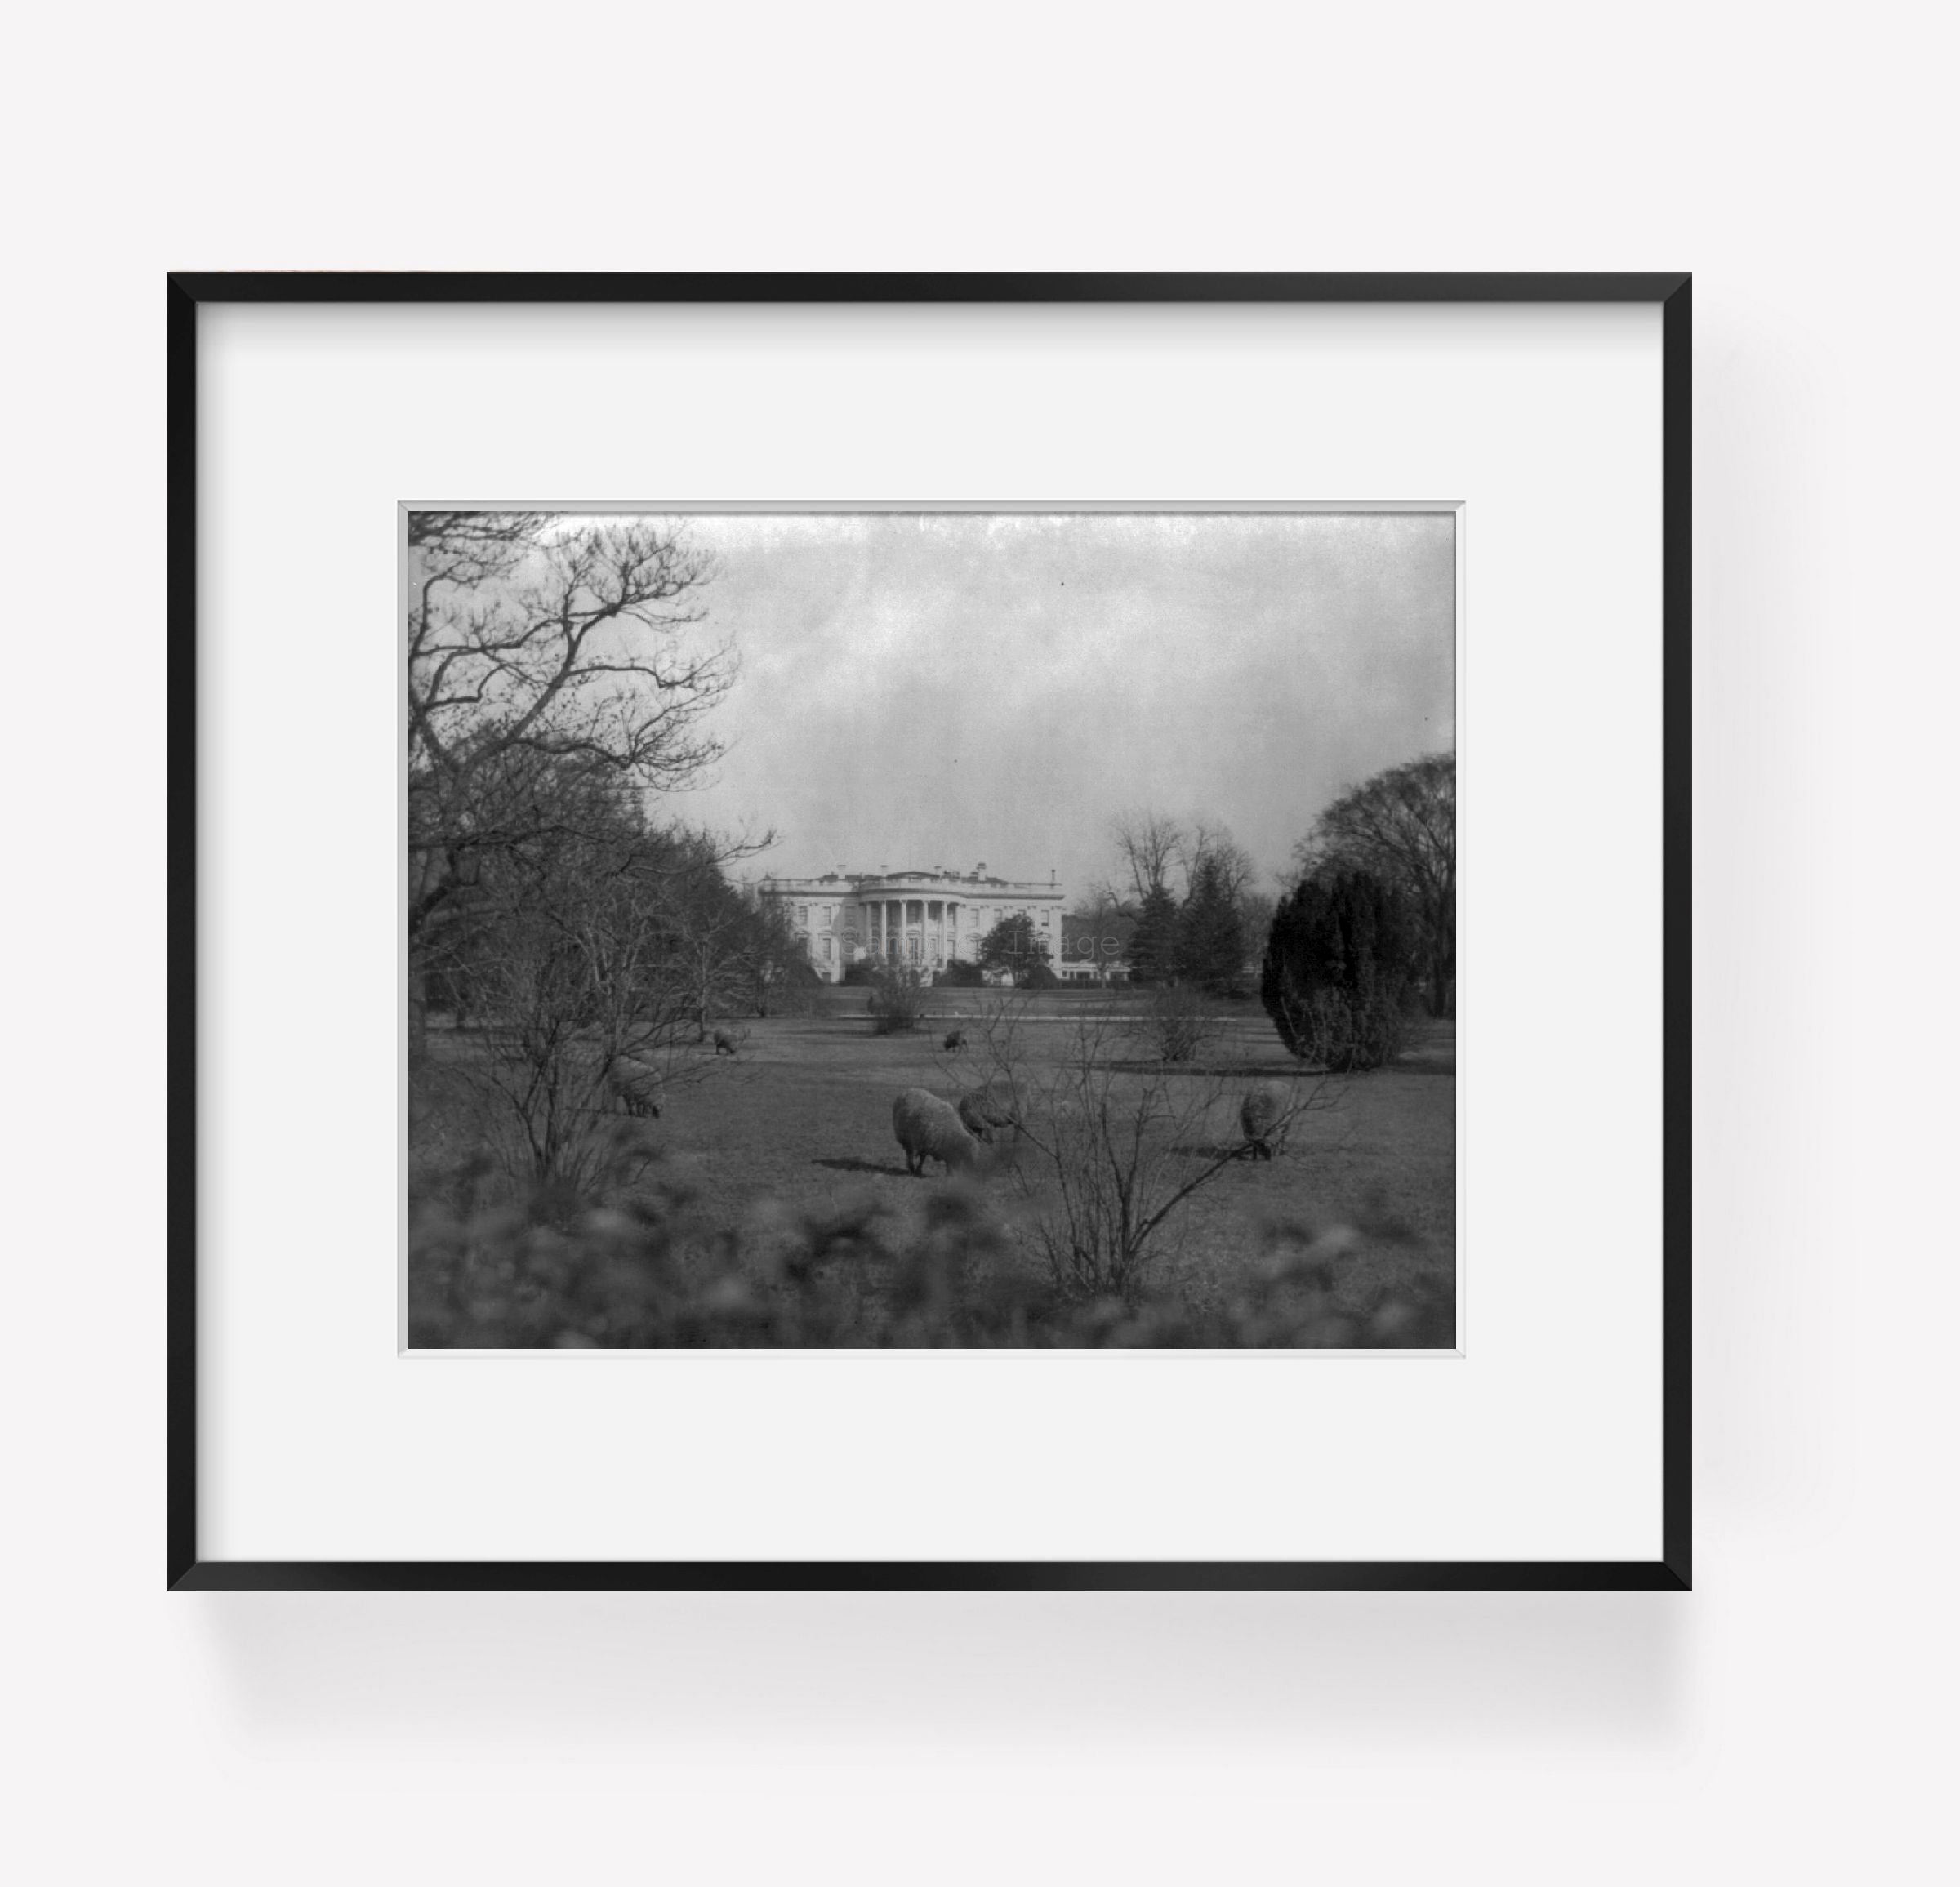 between 1914 and 1920 photograph of D.C. Wash. White House. Sheep grazing on the